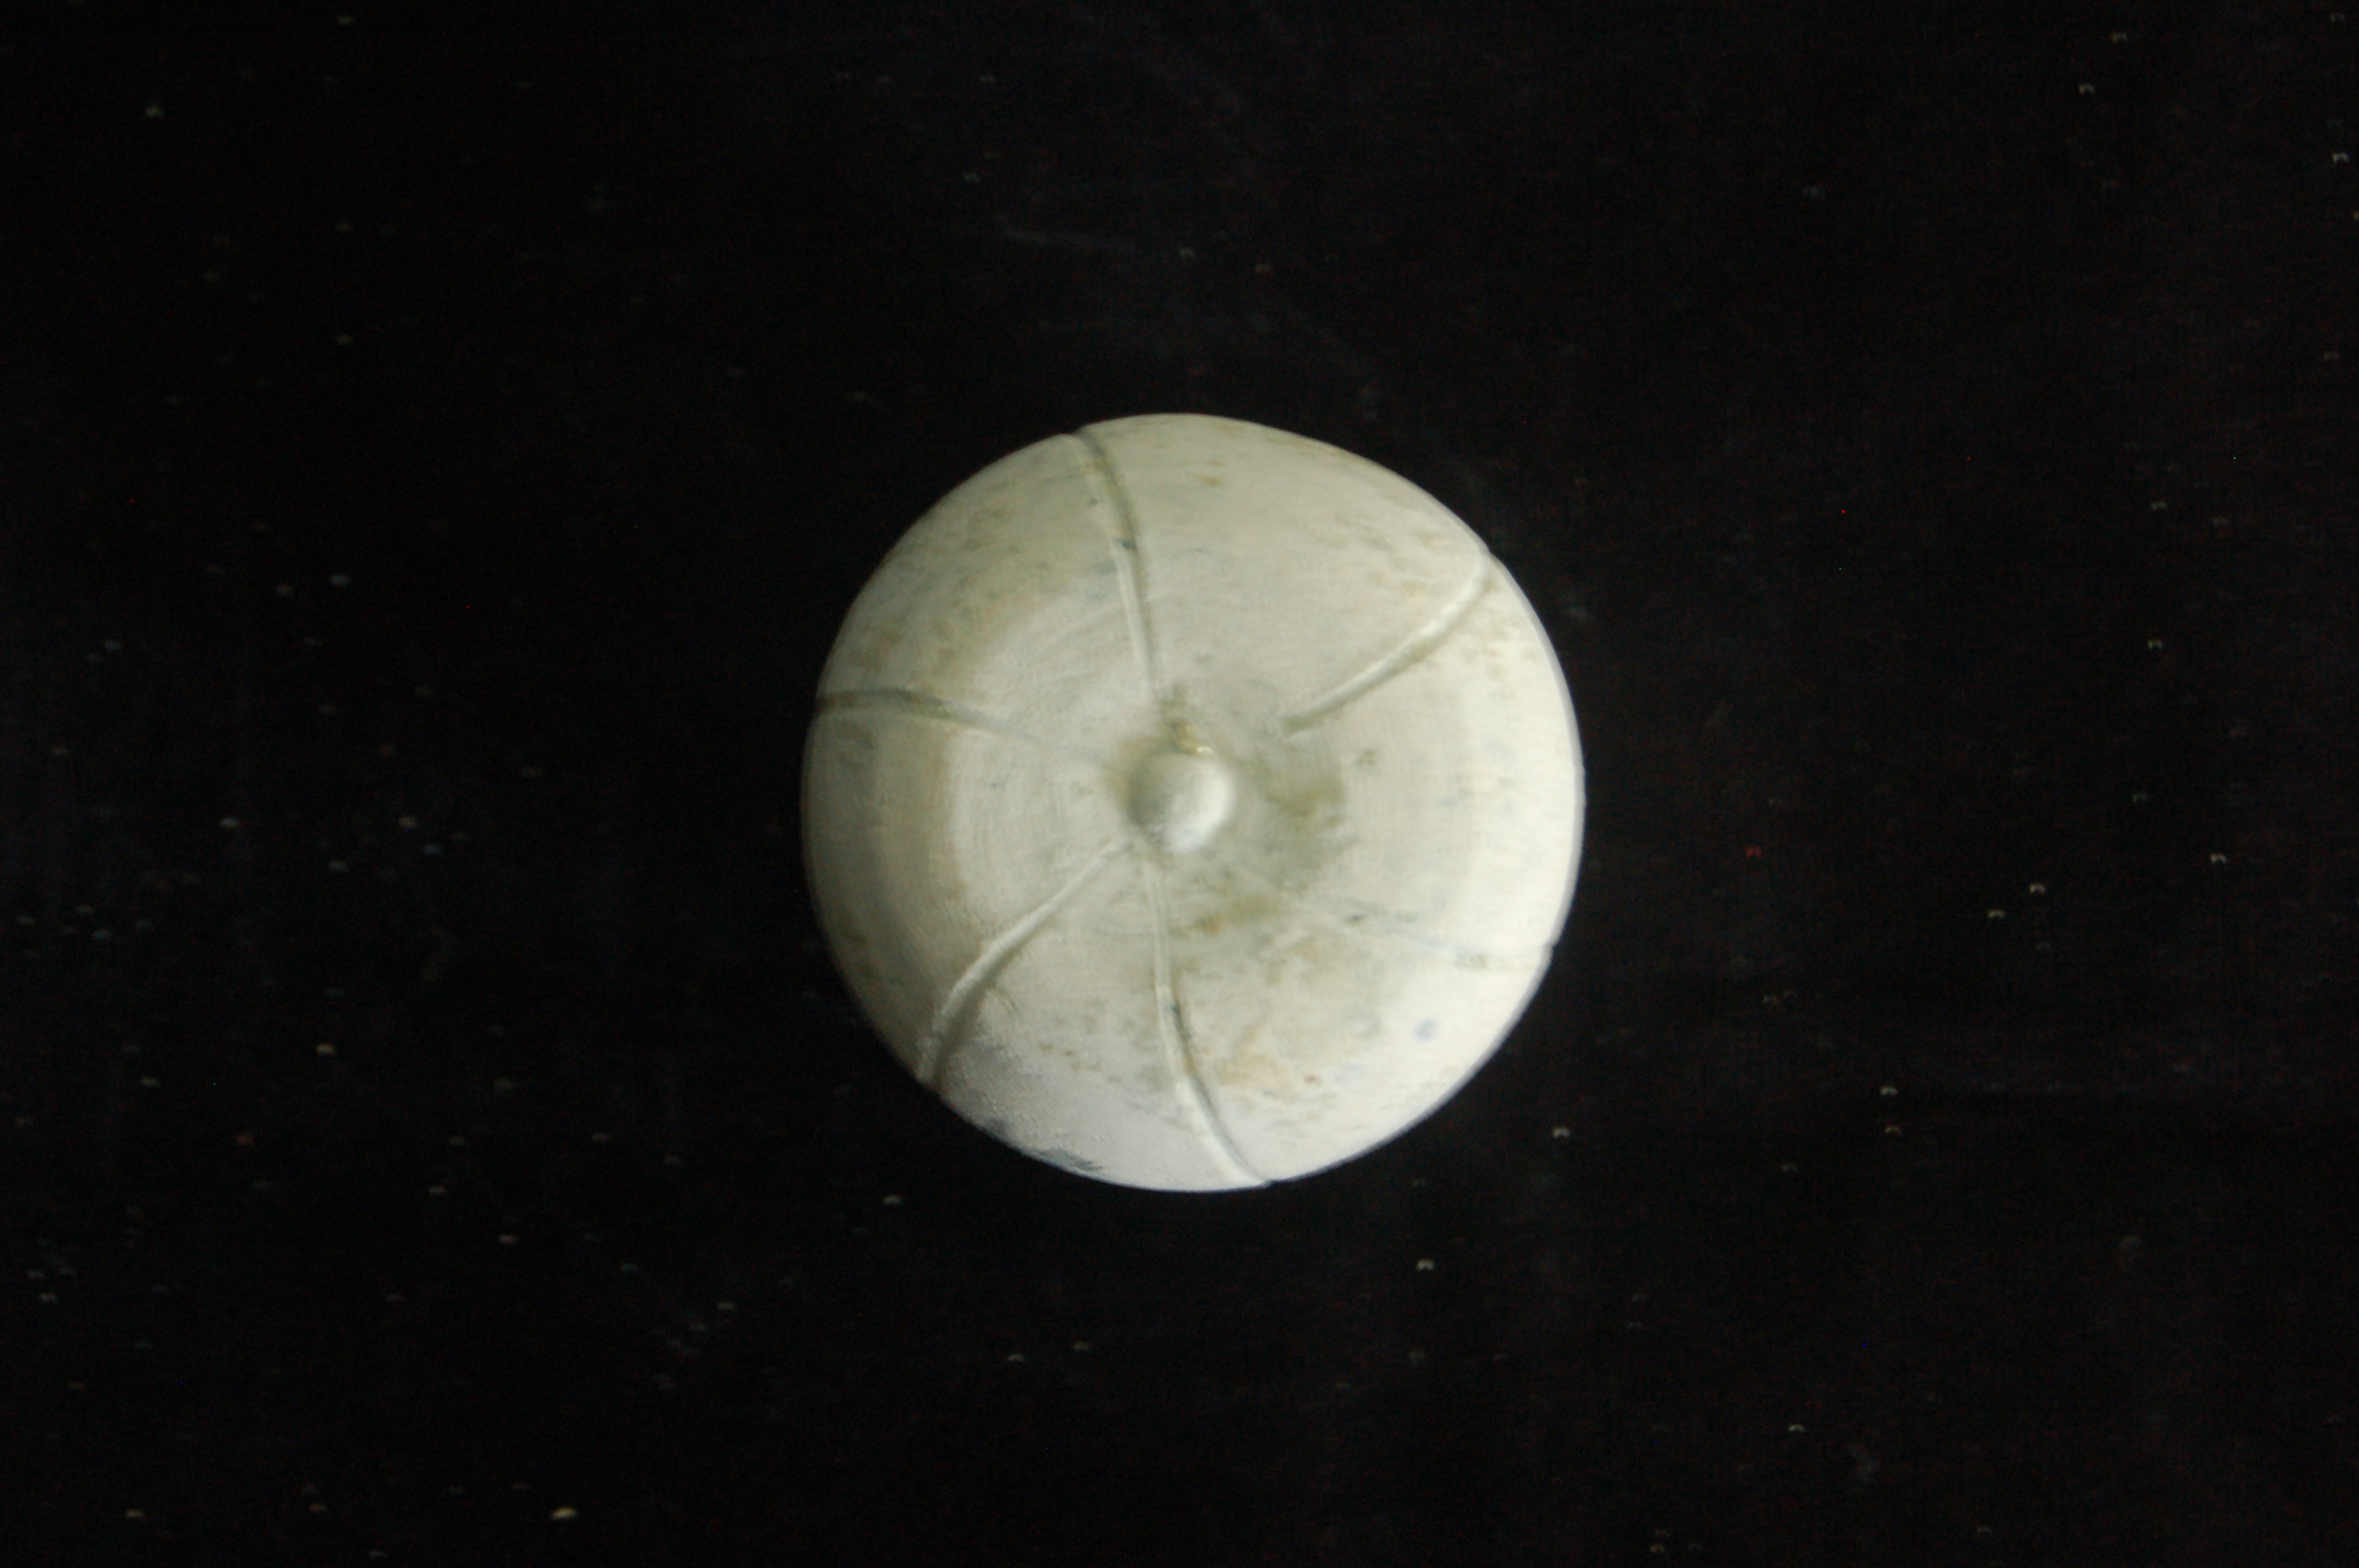 Small melon-shaped covered box with an incised whorl decoration and a central knob on the cover. Slightly concave base. Diameter 5.5 cm, height 4 cm.